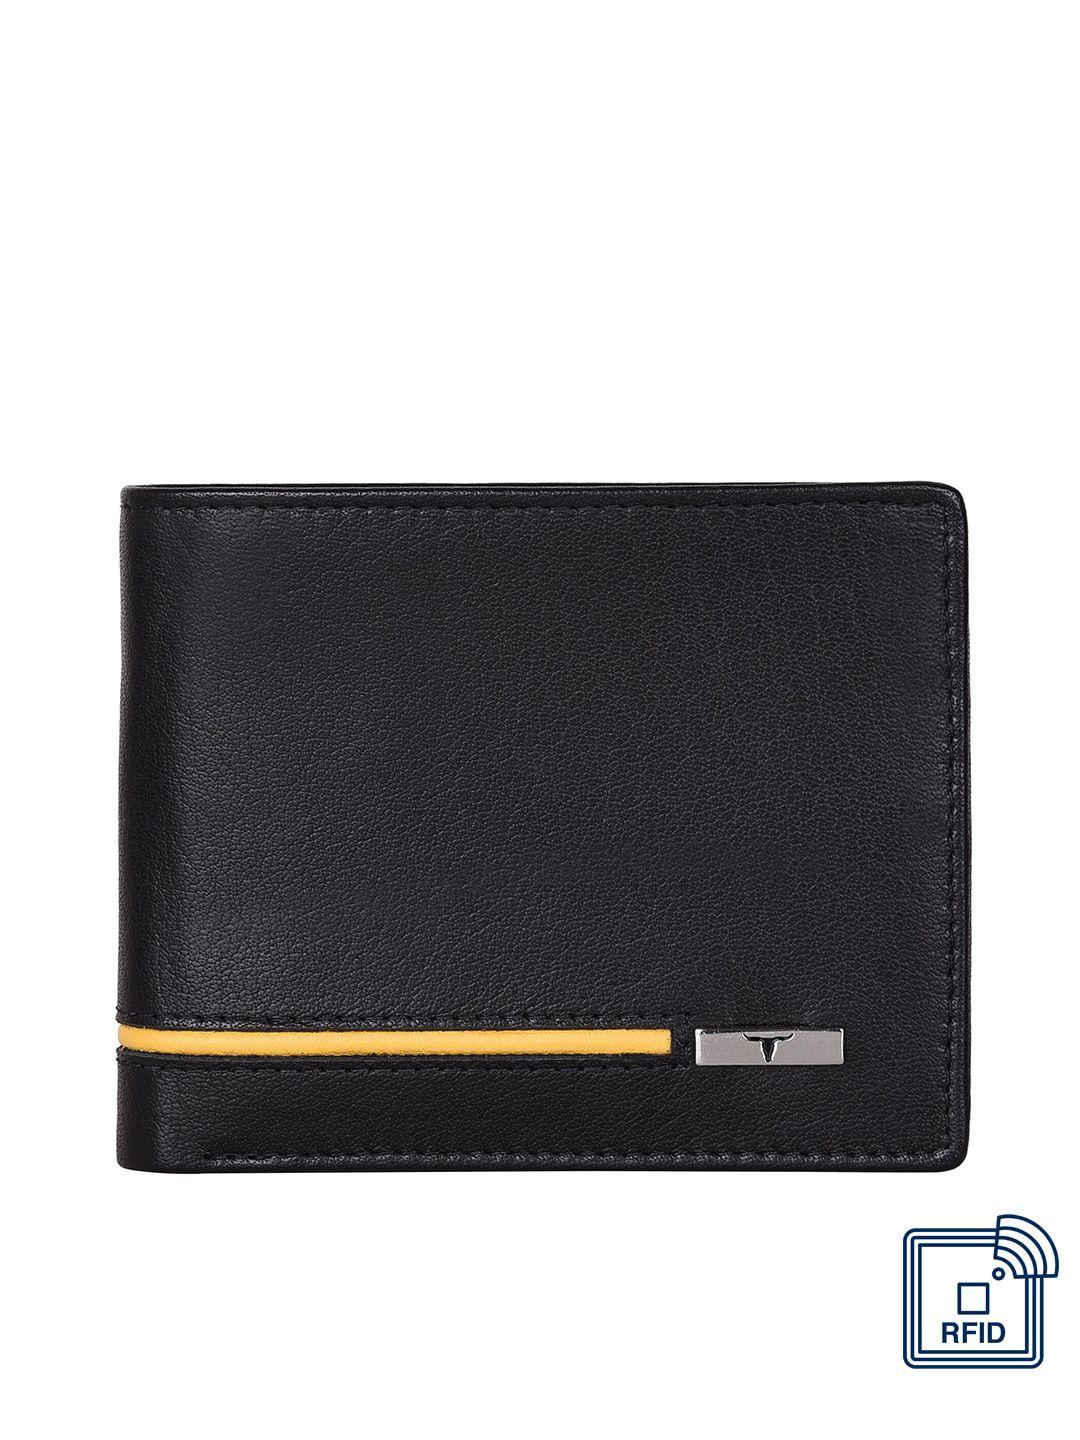 urban forest men black leather rfid two fold wallet